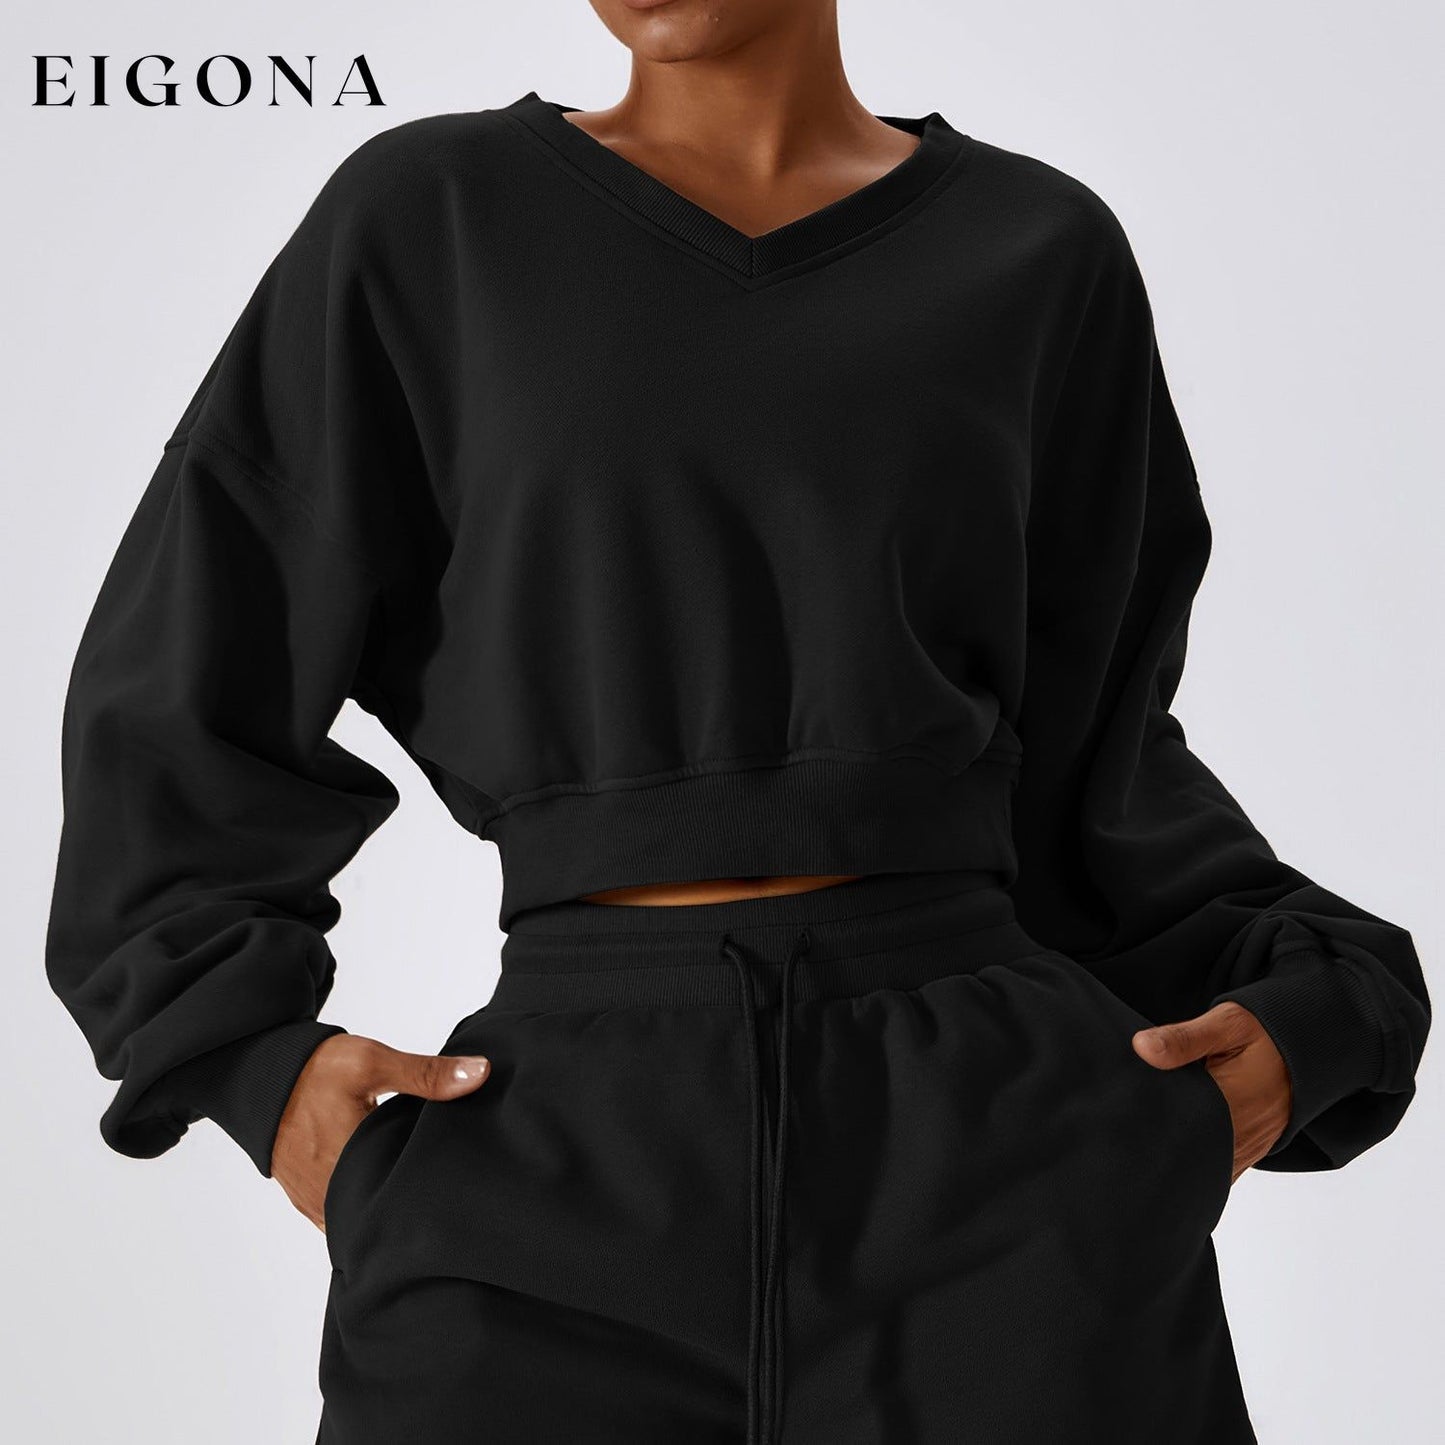 Loose Long Sleeve Sweatshirt Outdoor Keep Warm V Neck Pullover All Matching Casual Sweatshirt Top Advanced Black 2 pieces clothes lounge sets sweaters